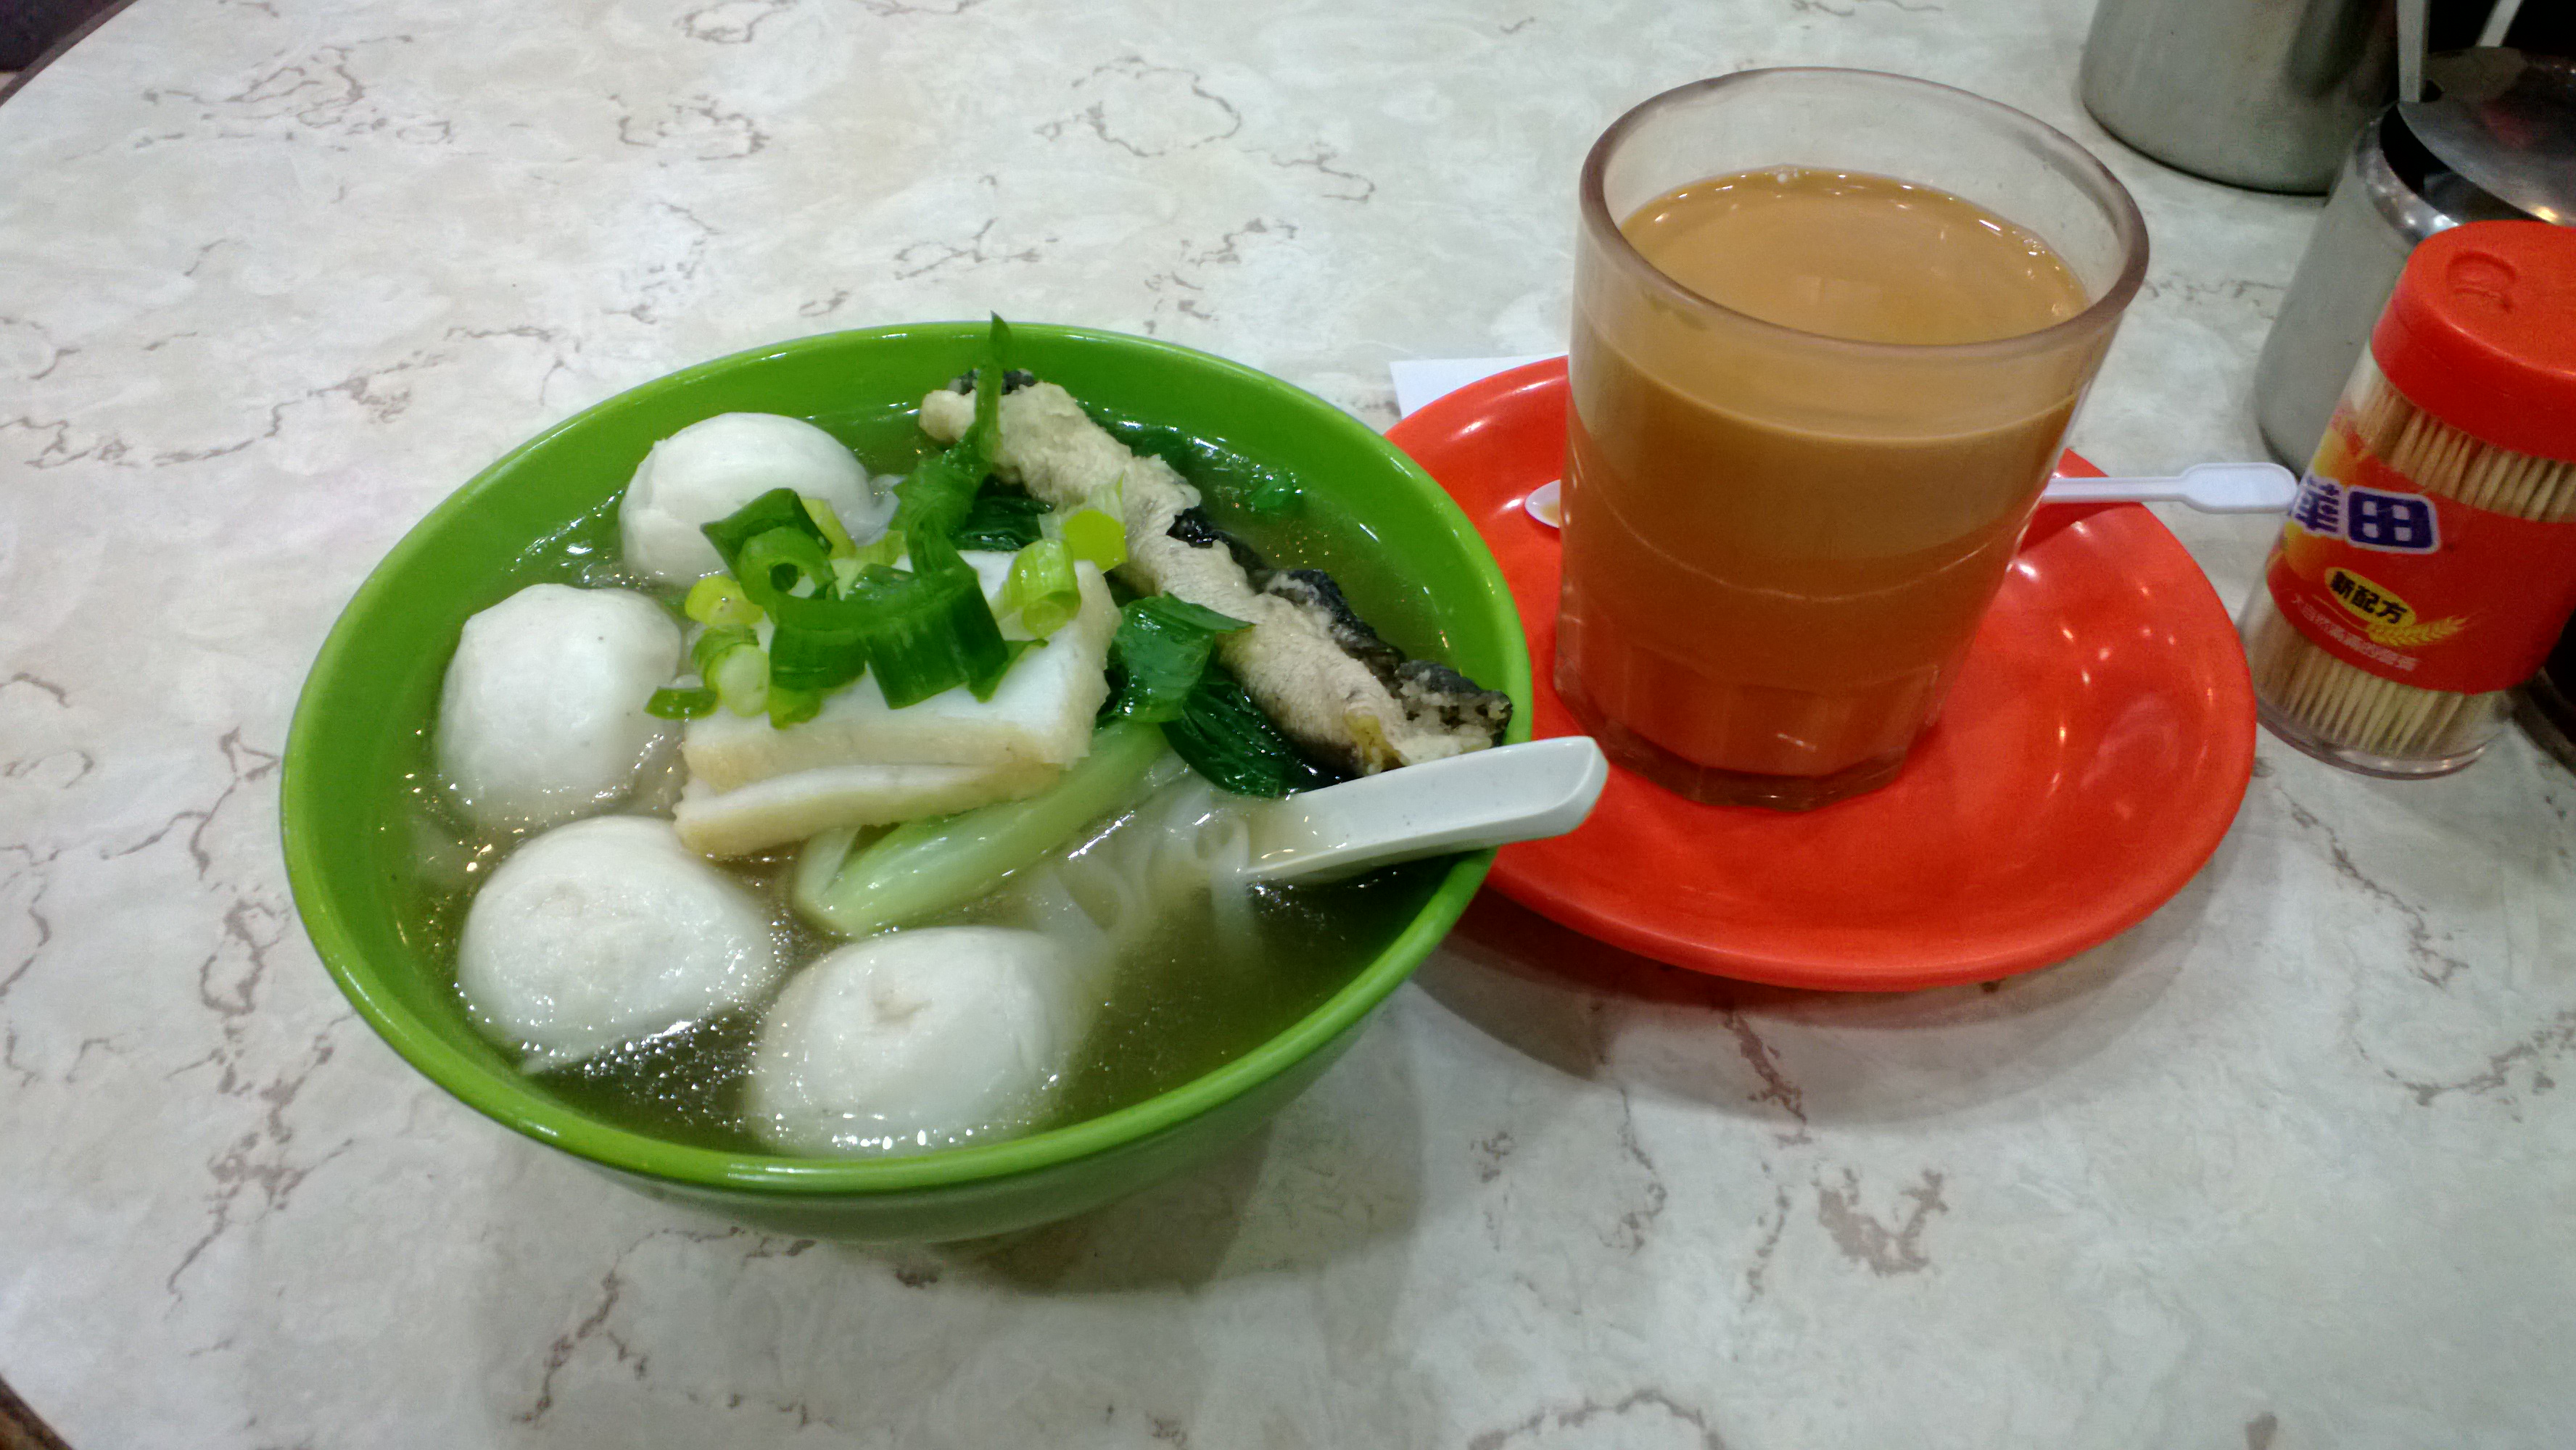 Fish ball noodle with deep fried fish skin and milk tea